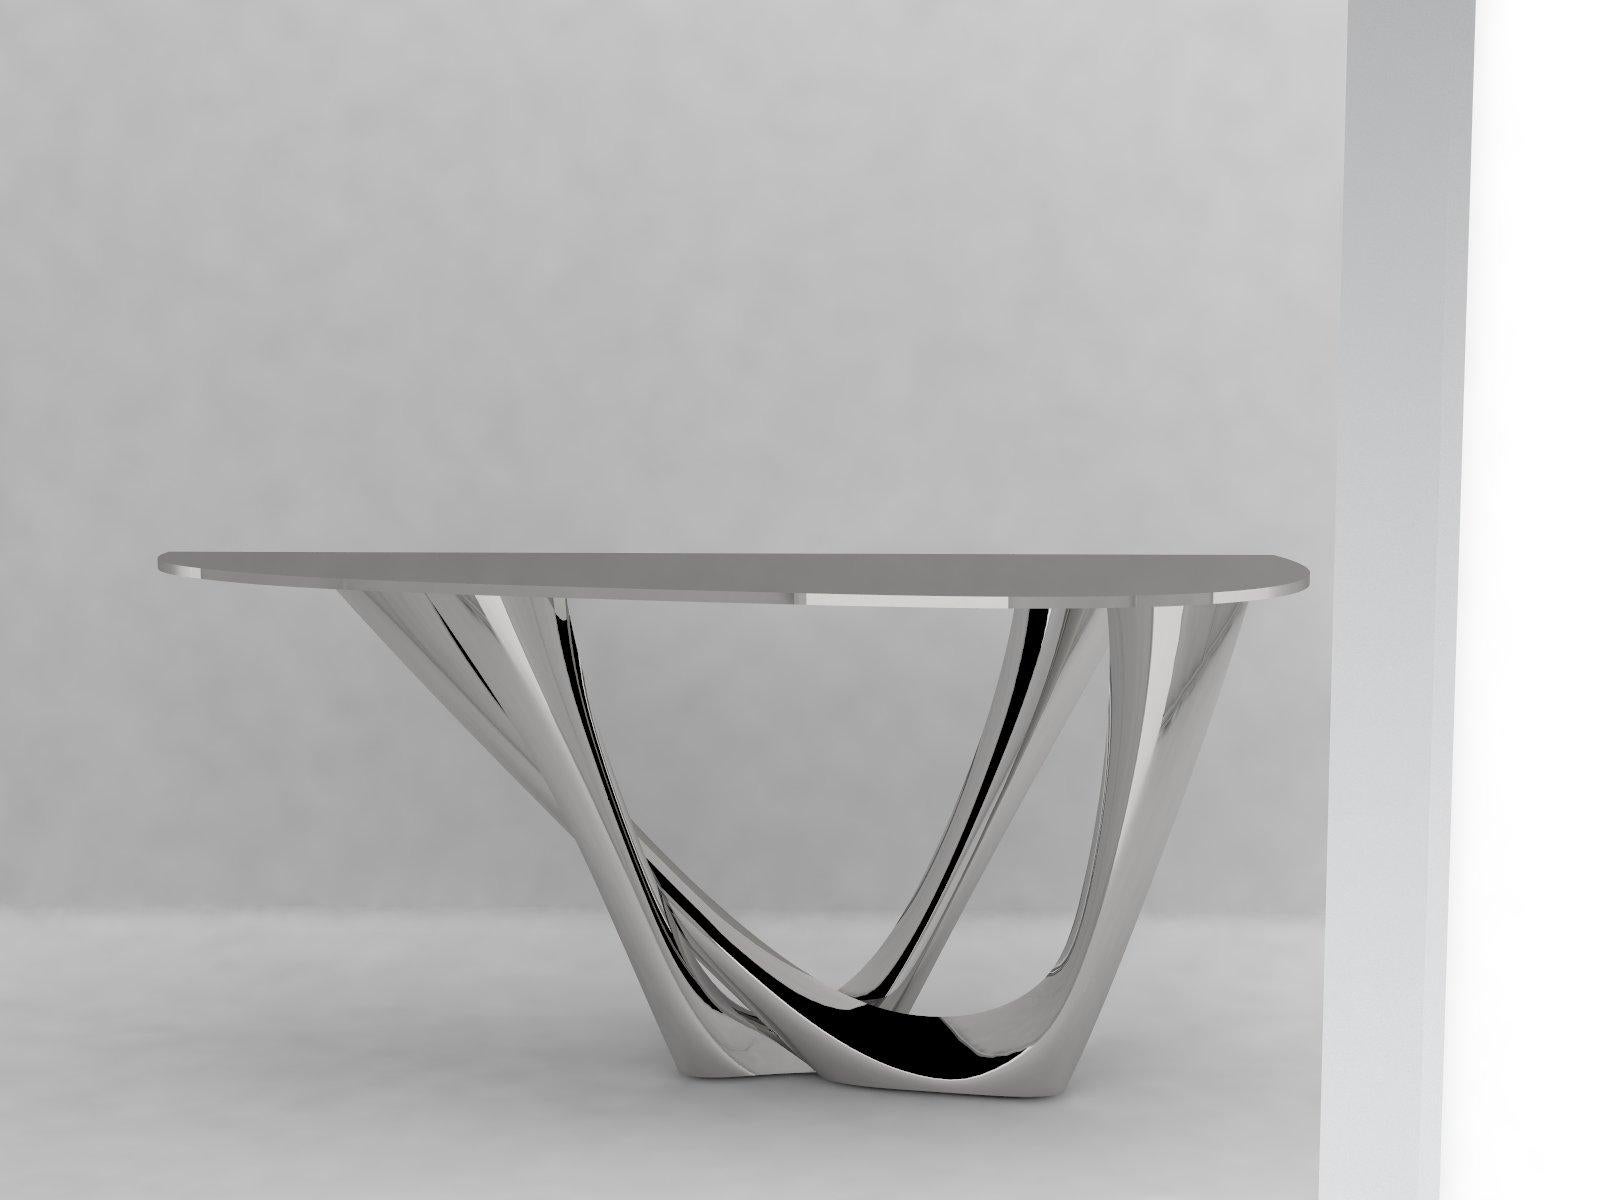 G-Console is another bionic object in our collection. Created for smaller spaces, it gives another possibility in interior planning and at the same time preserves unique shape of original G-Table. Both objects were made for enthusiasts of bionic